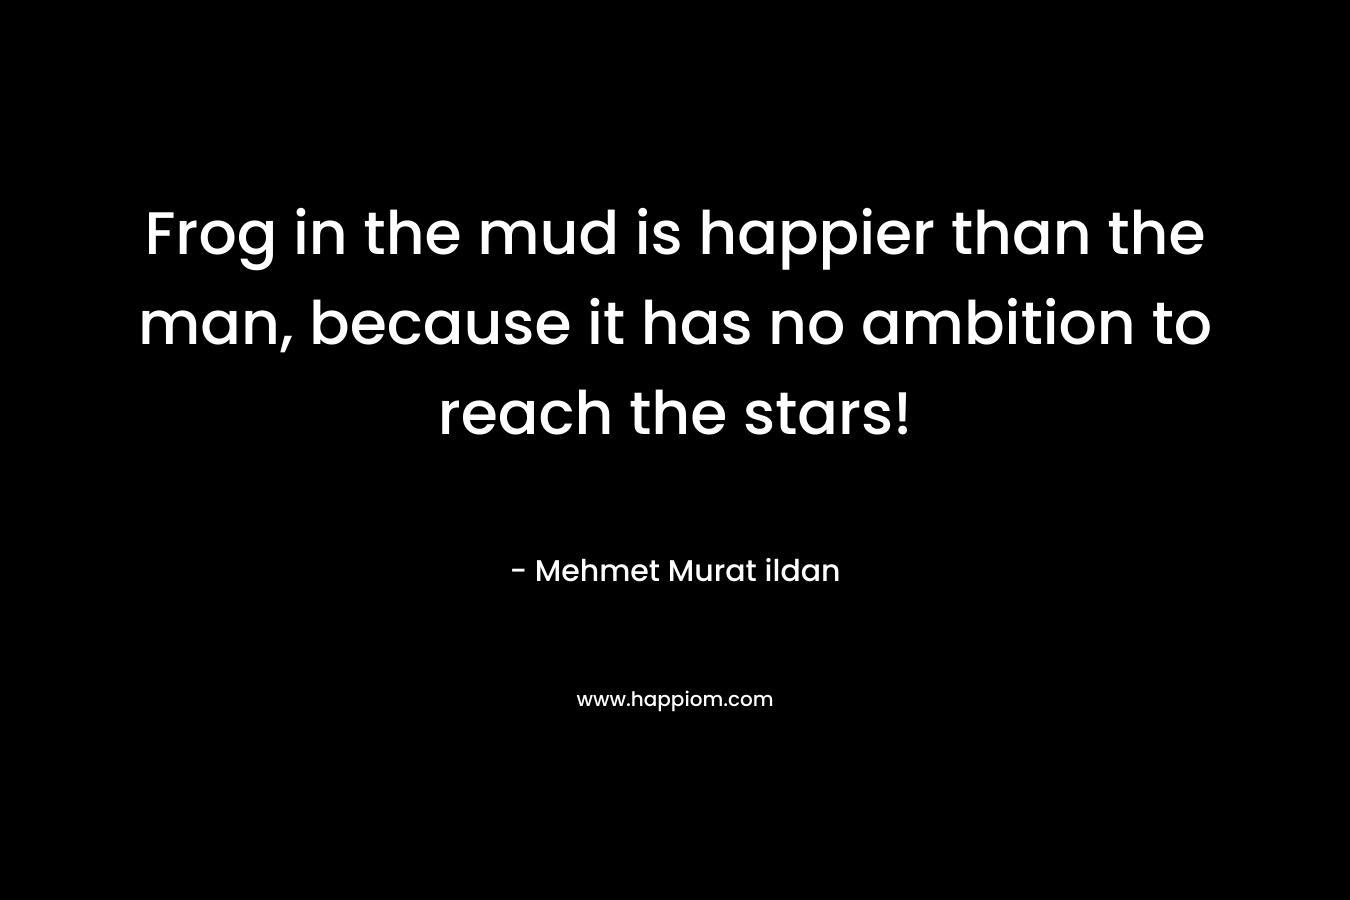 Frog in the mud is happier than the man, because it has no ambition to reach the stars!